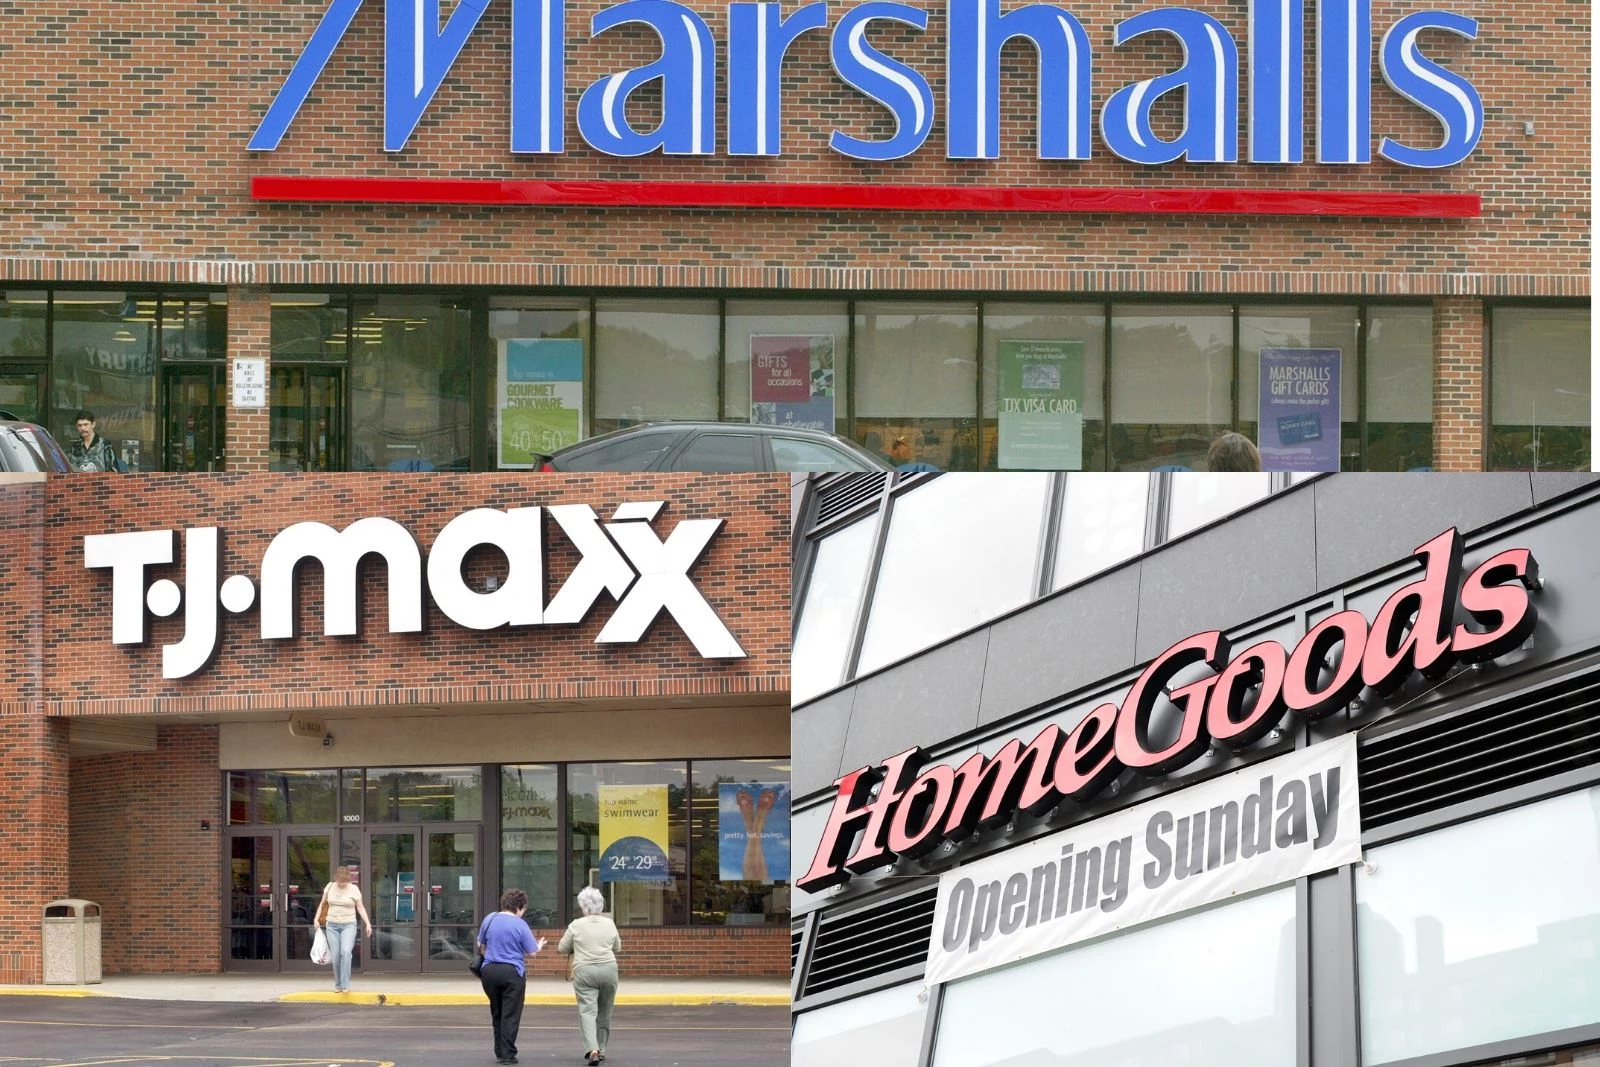 Marshalls T.J. Mazz And HomeGoods Re Opening 